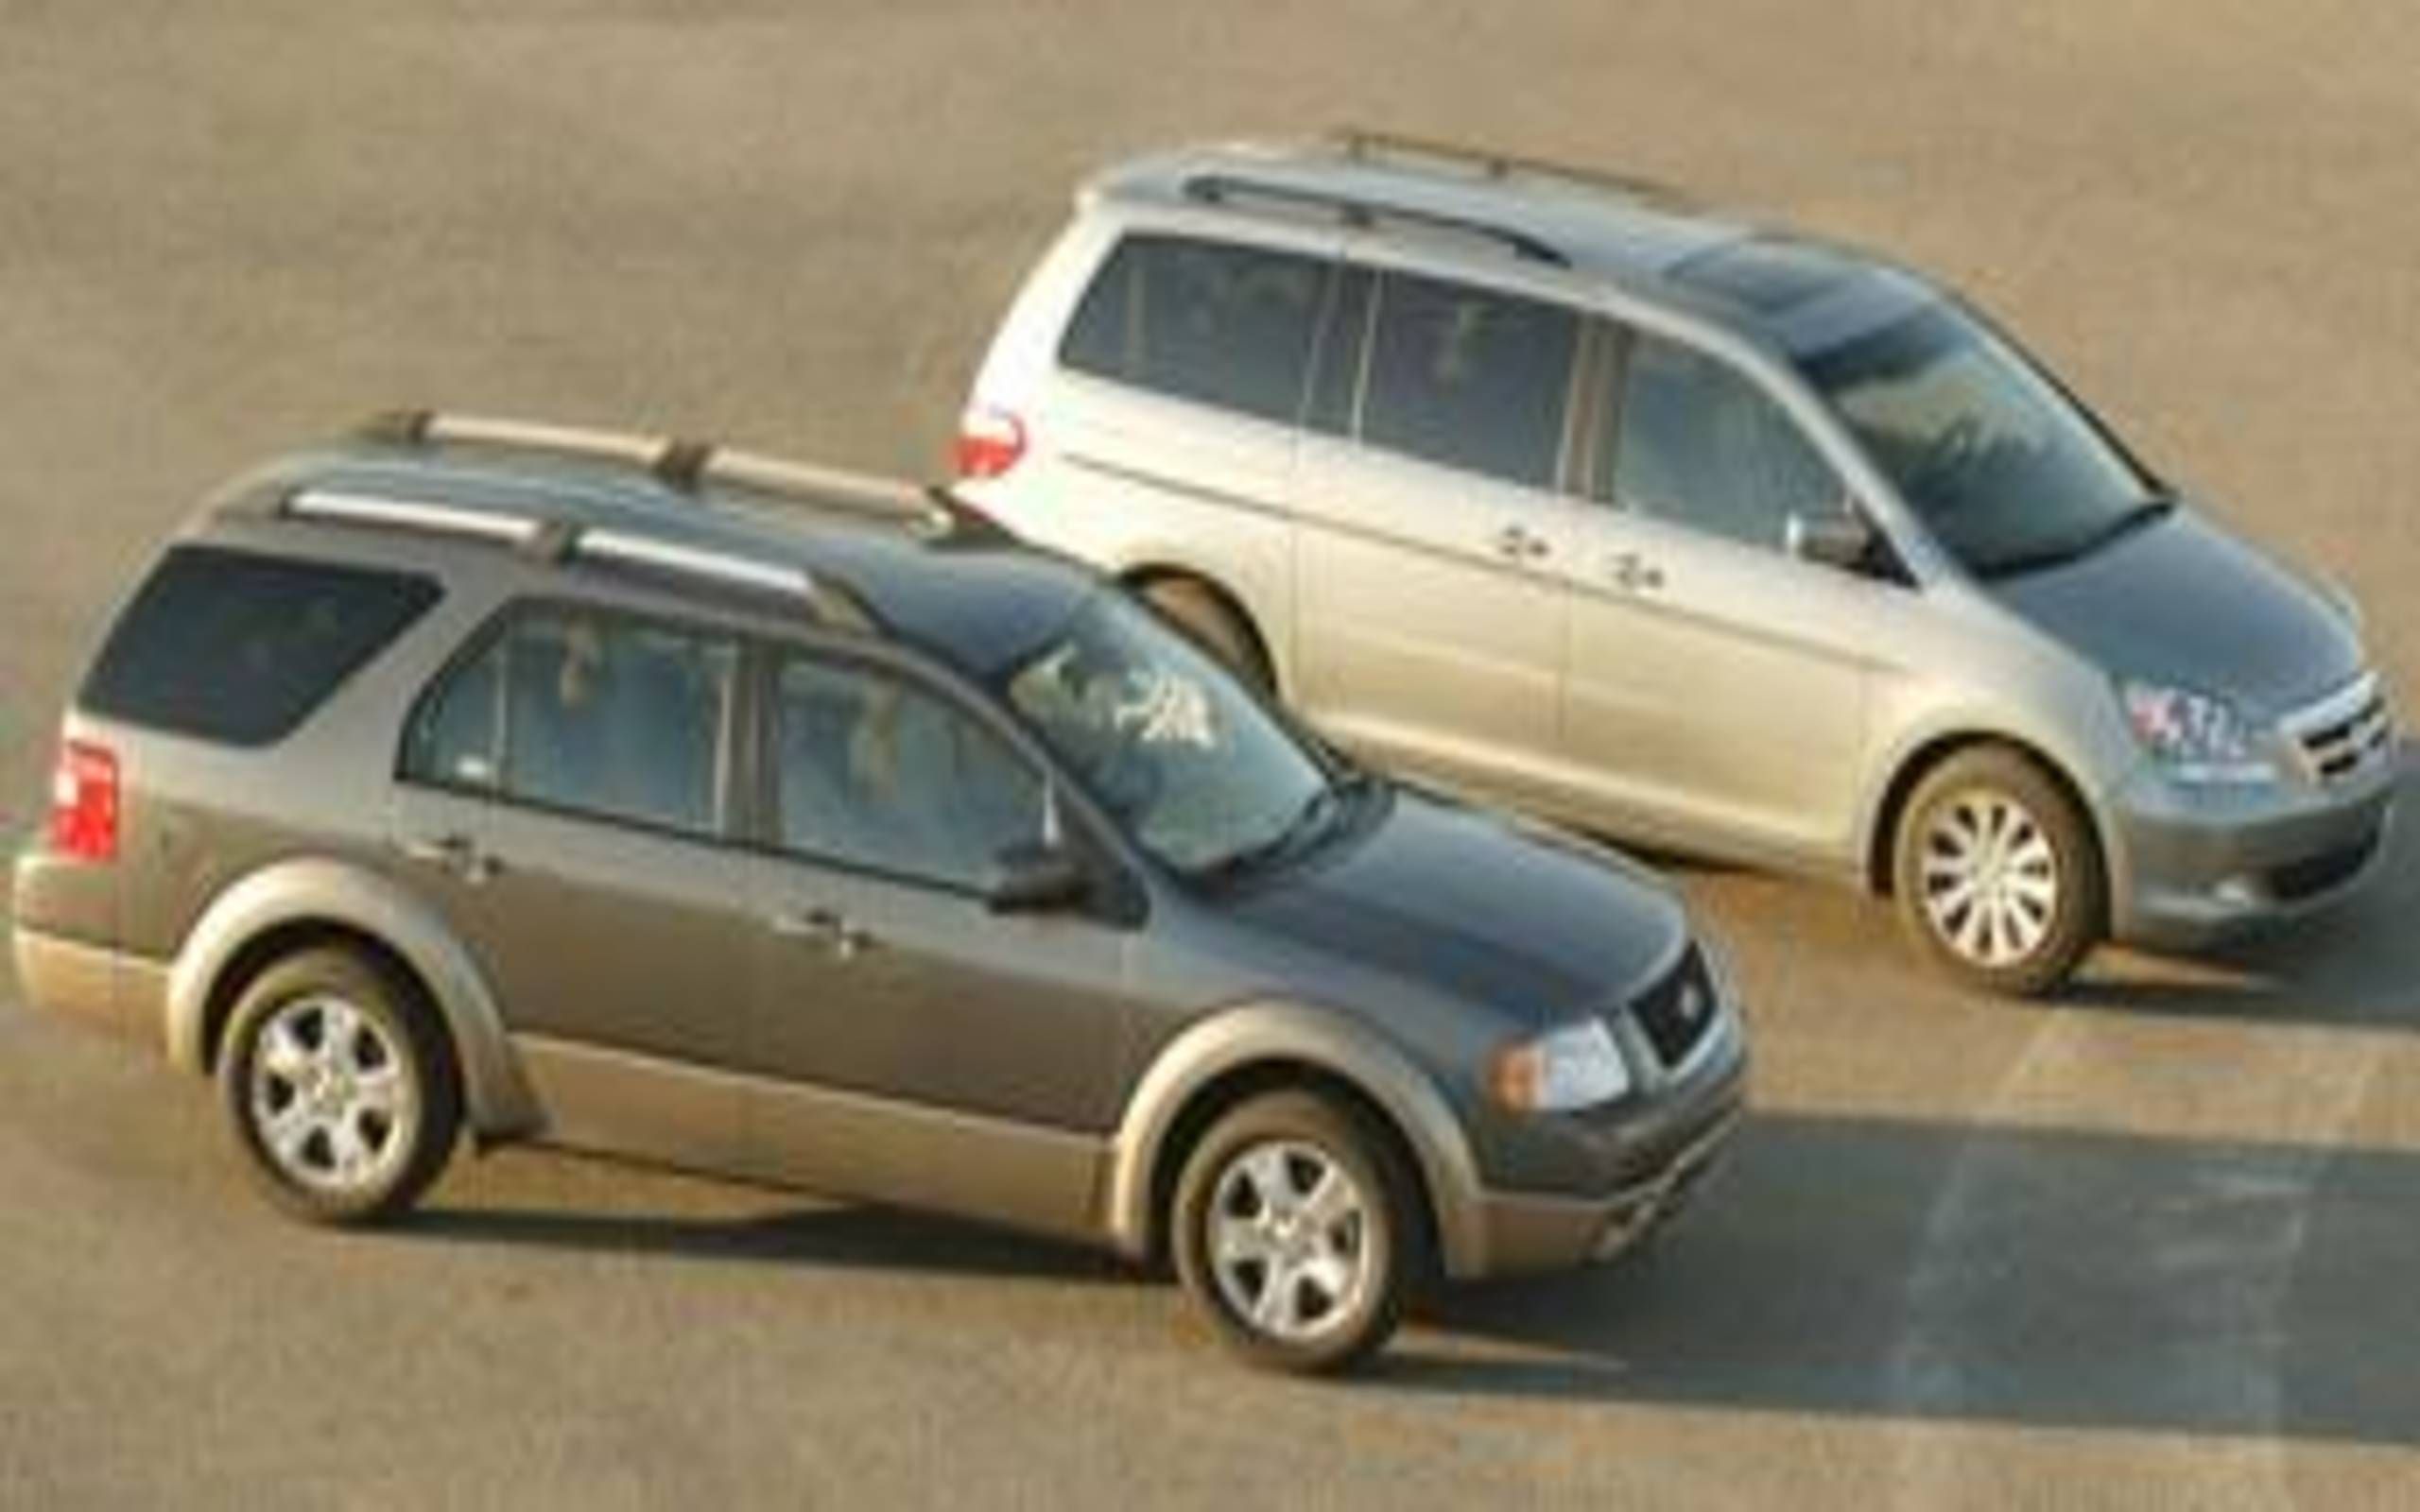 Double Take: 2005 Ford Freestyle vs. 2005 Honda Odyssey: Family Trucksters:  Different approaches, same goal; which takes the cake?